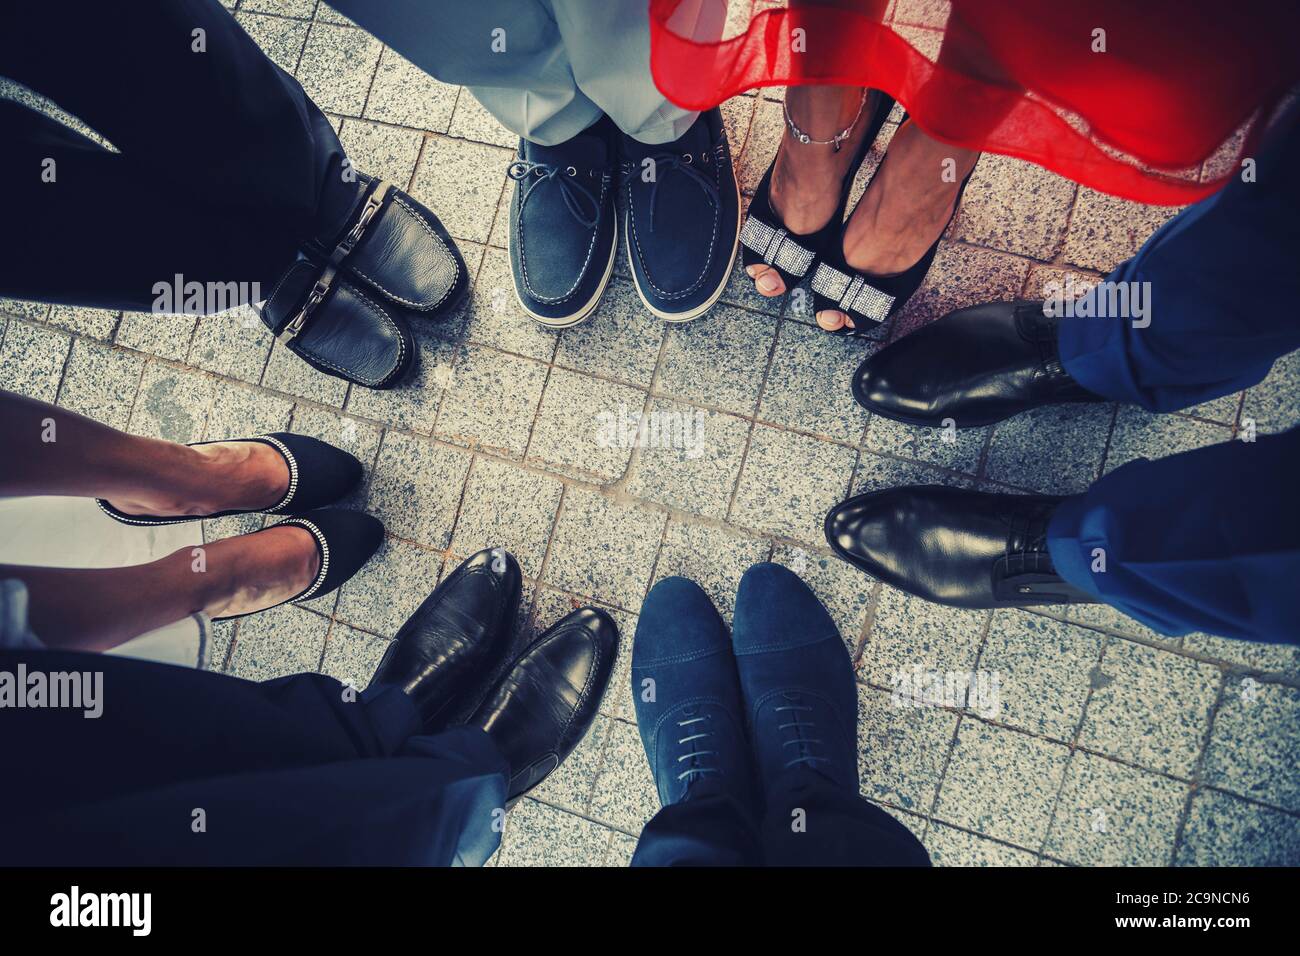 Top view of feet of fashionable, stylish people standing in a circle Stock Photo